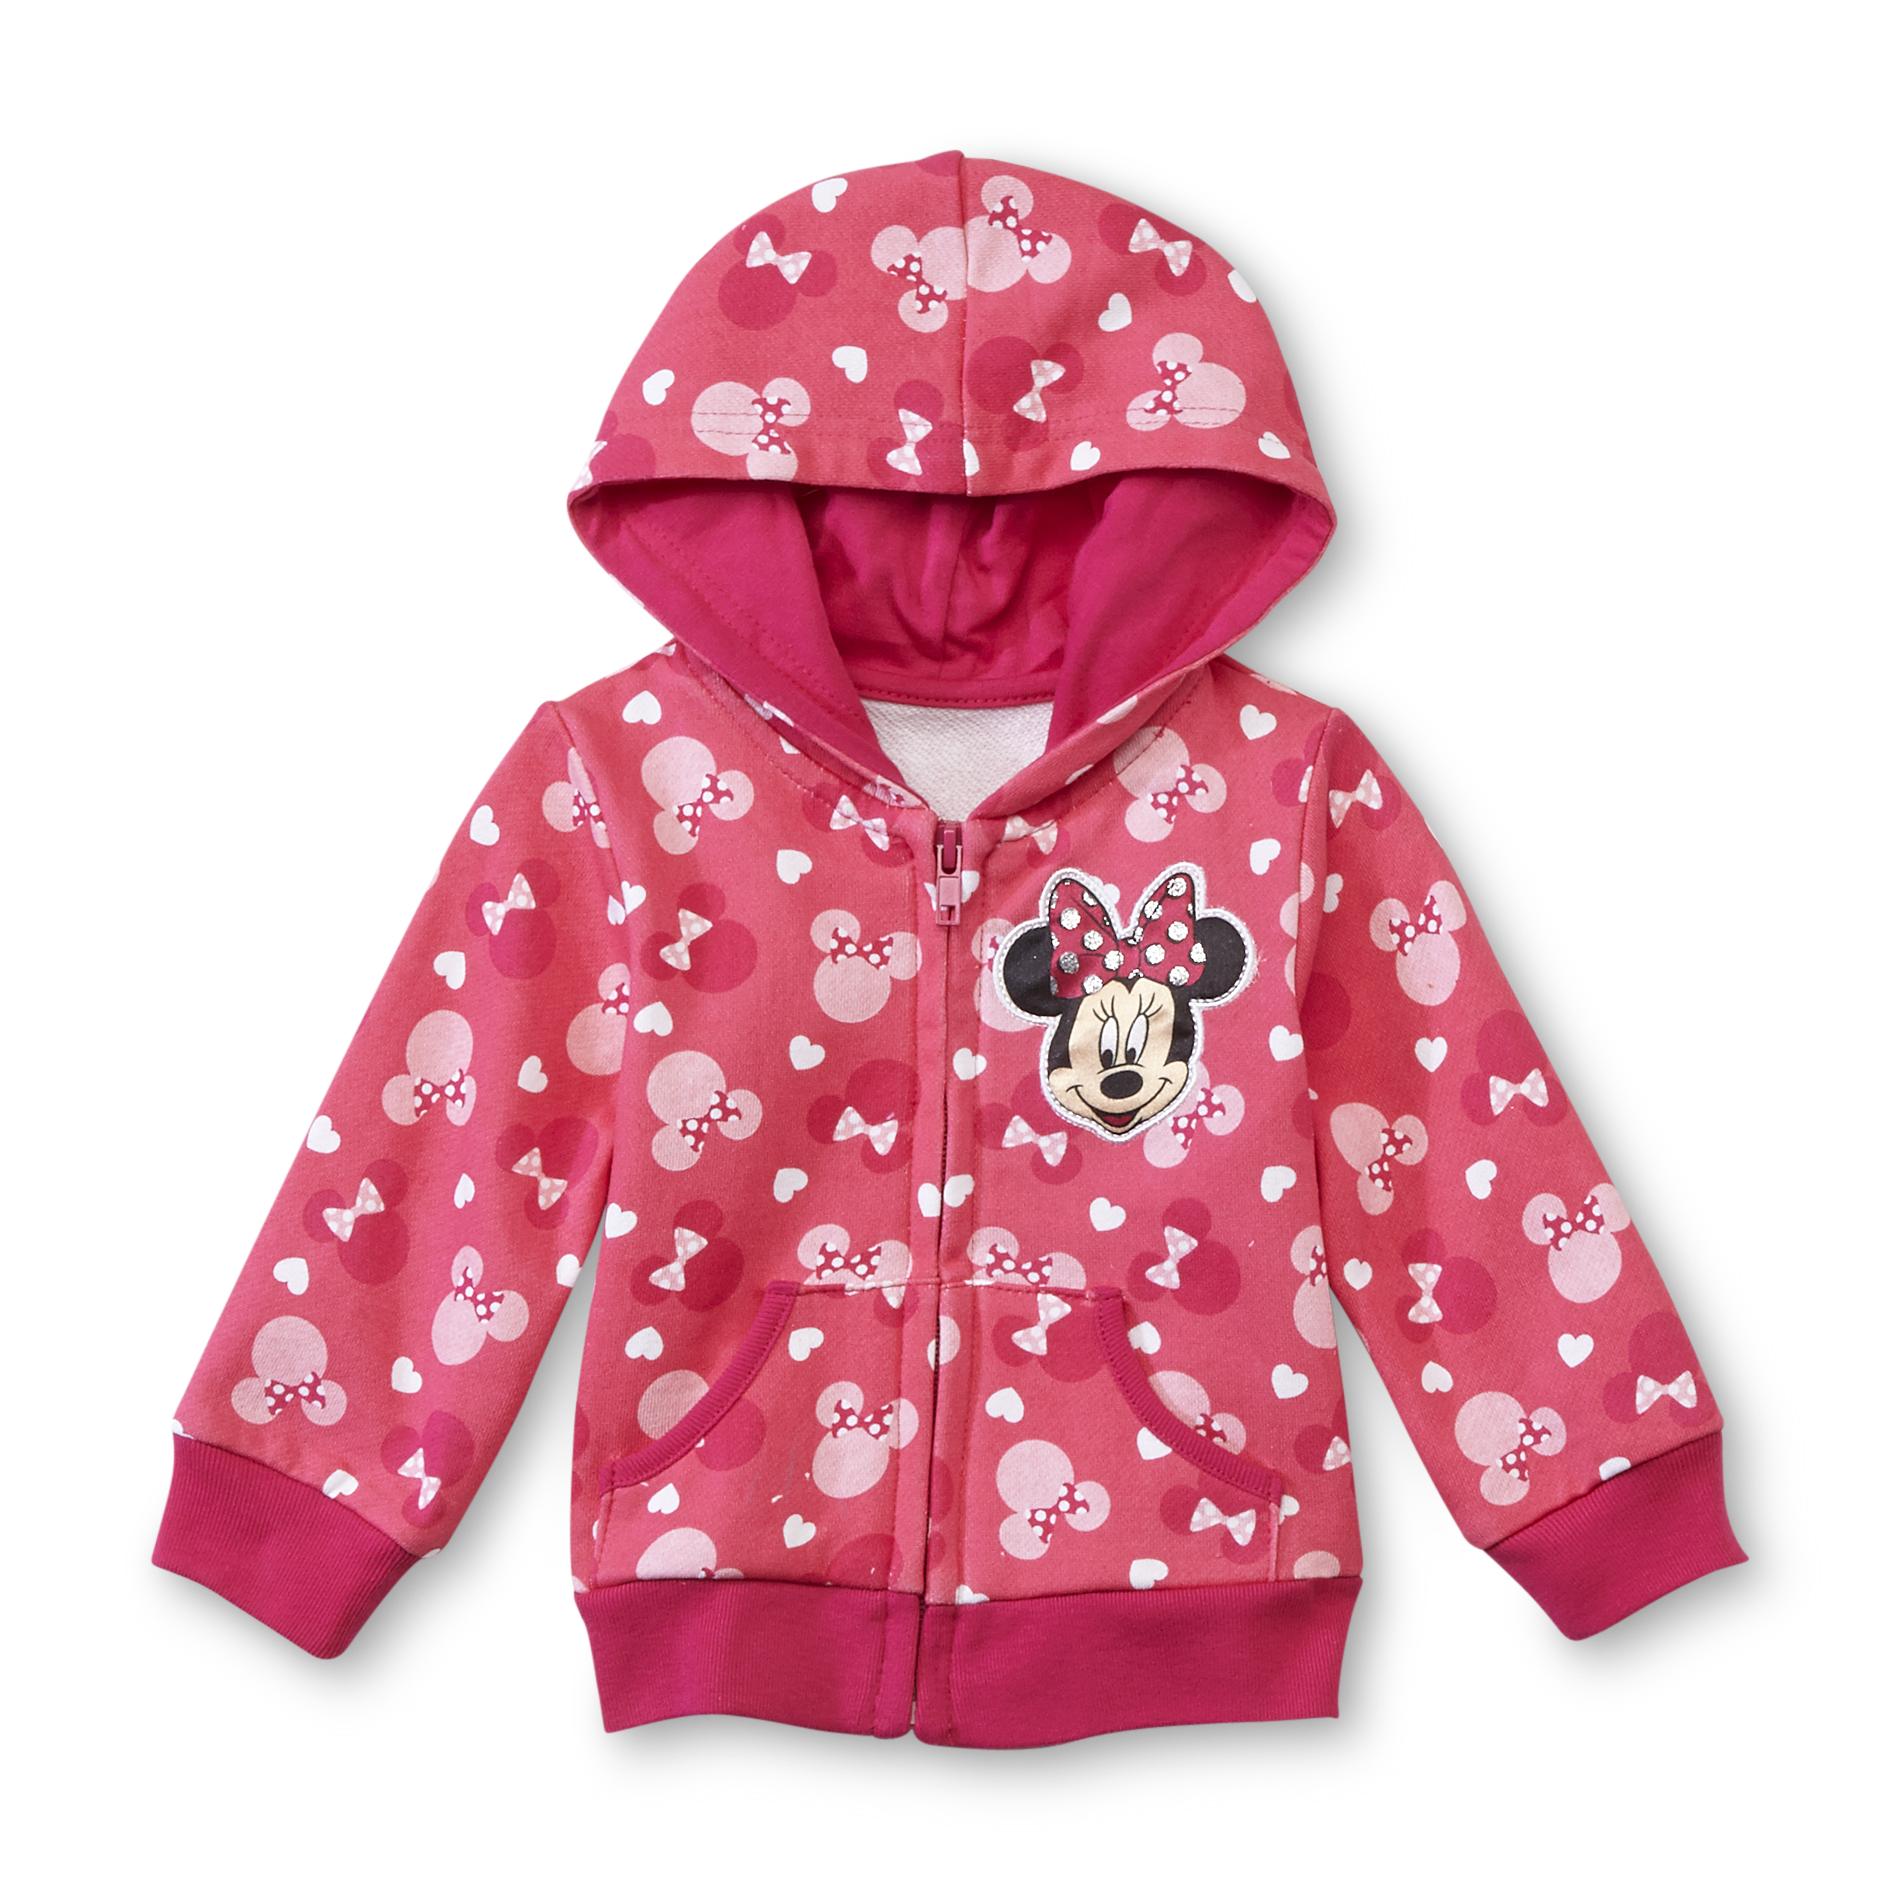 Disney Minnie Mouse Infant & Toddler Girl's Hoodie Jacket